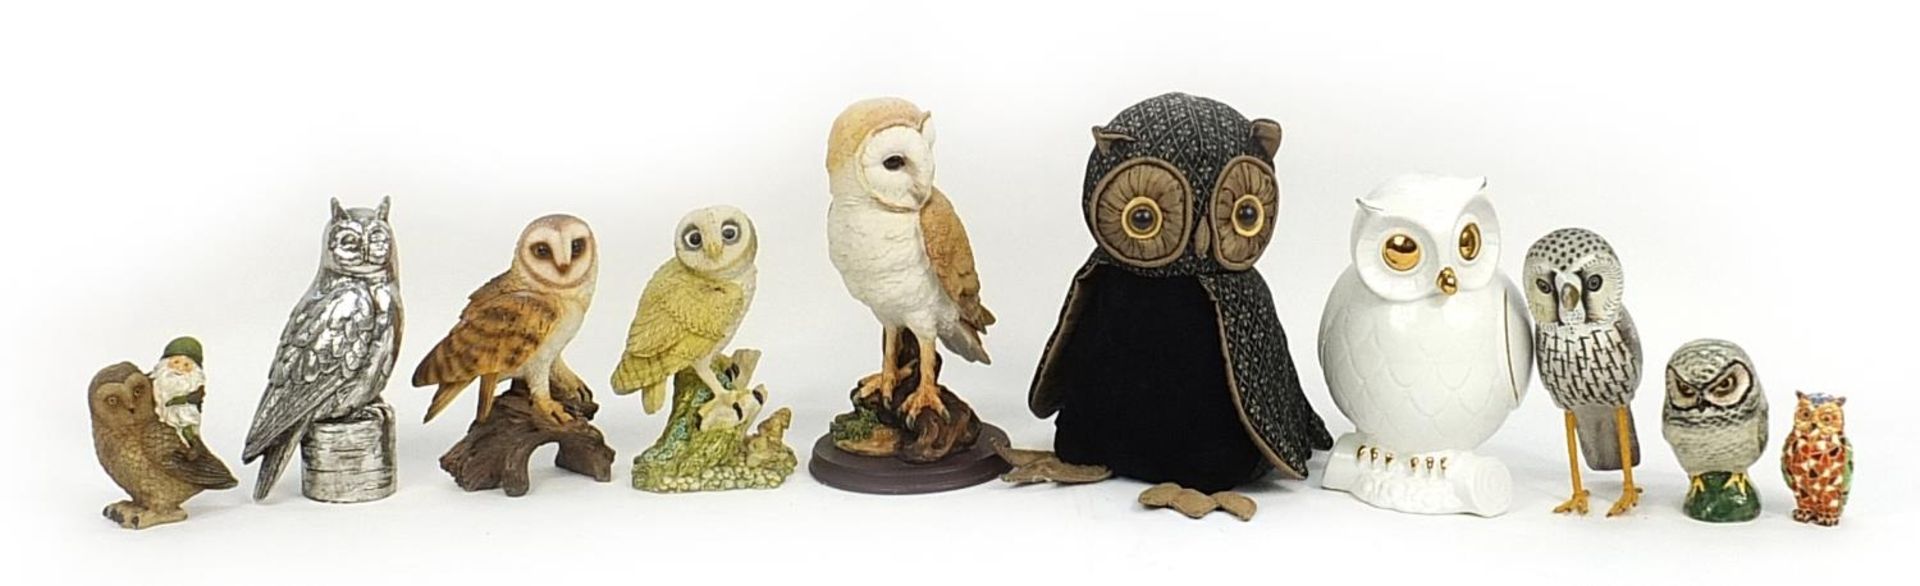 Collectable owls including Regency Fine Art, Leonardo Collection and a hand painted Babbacombe